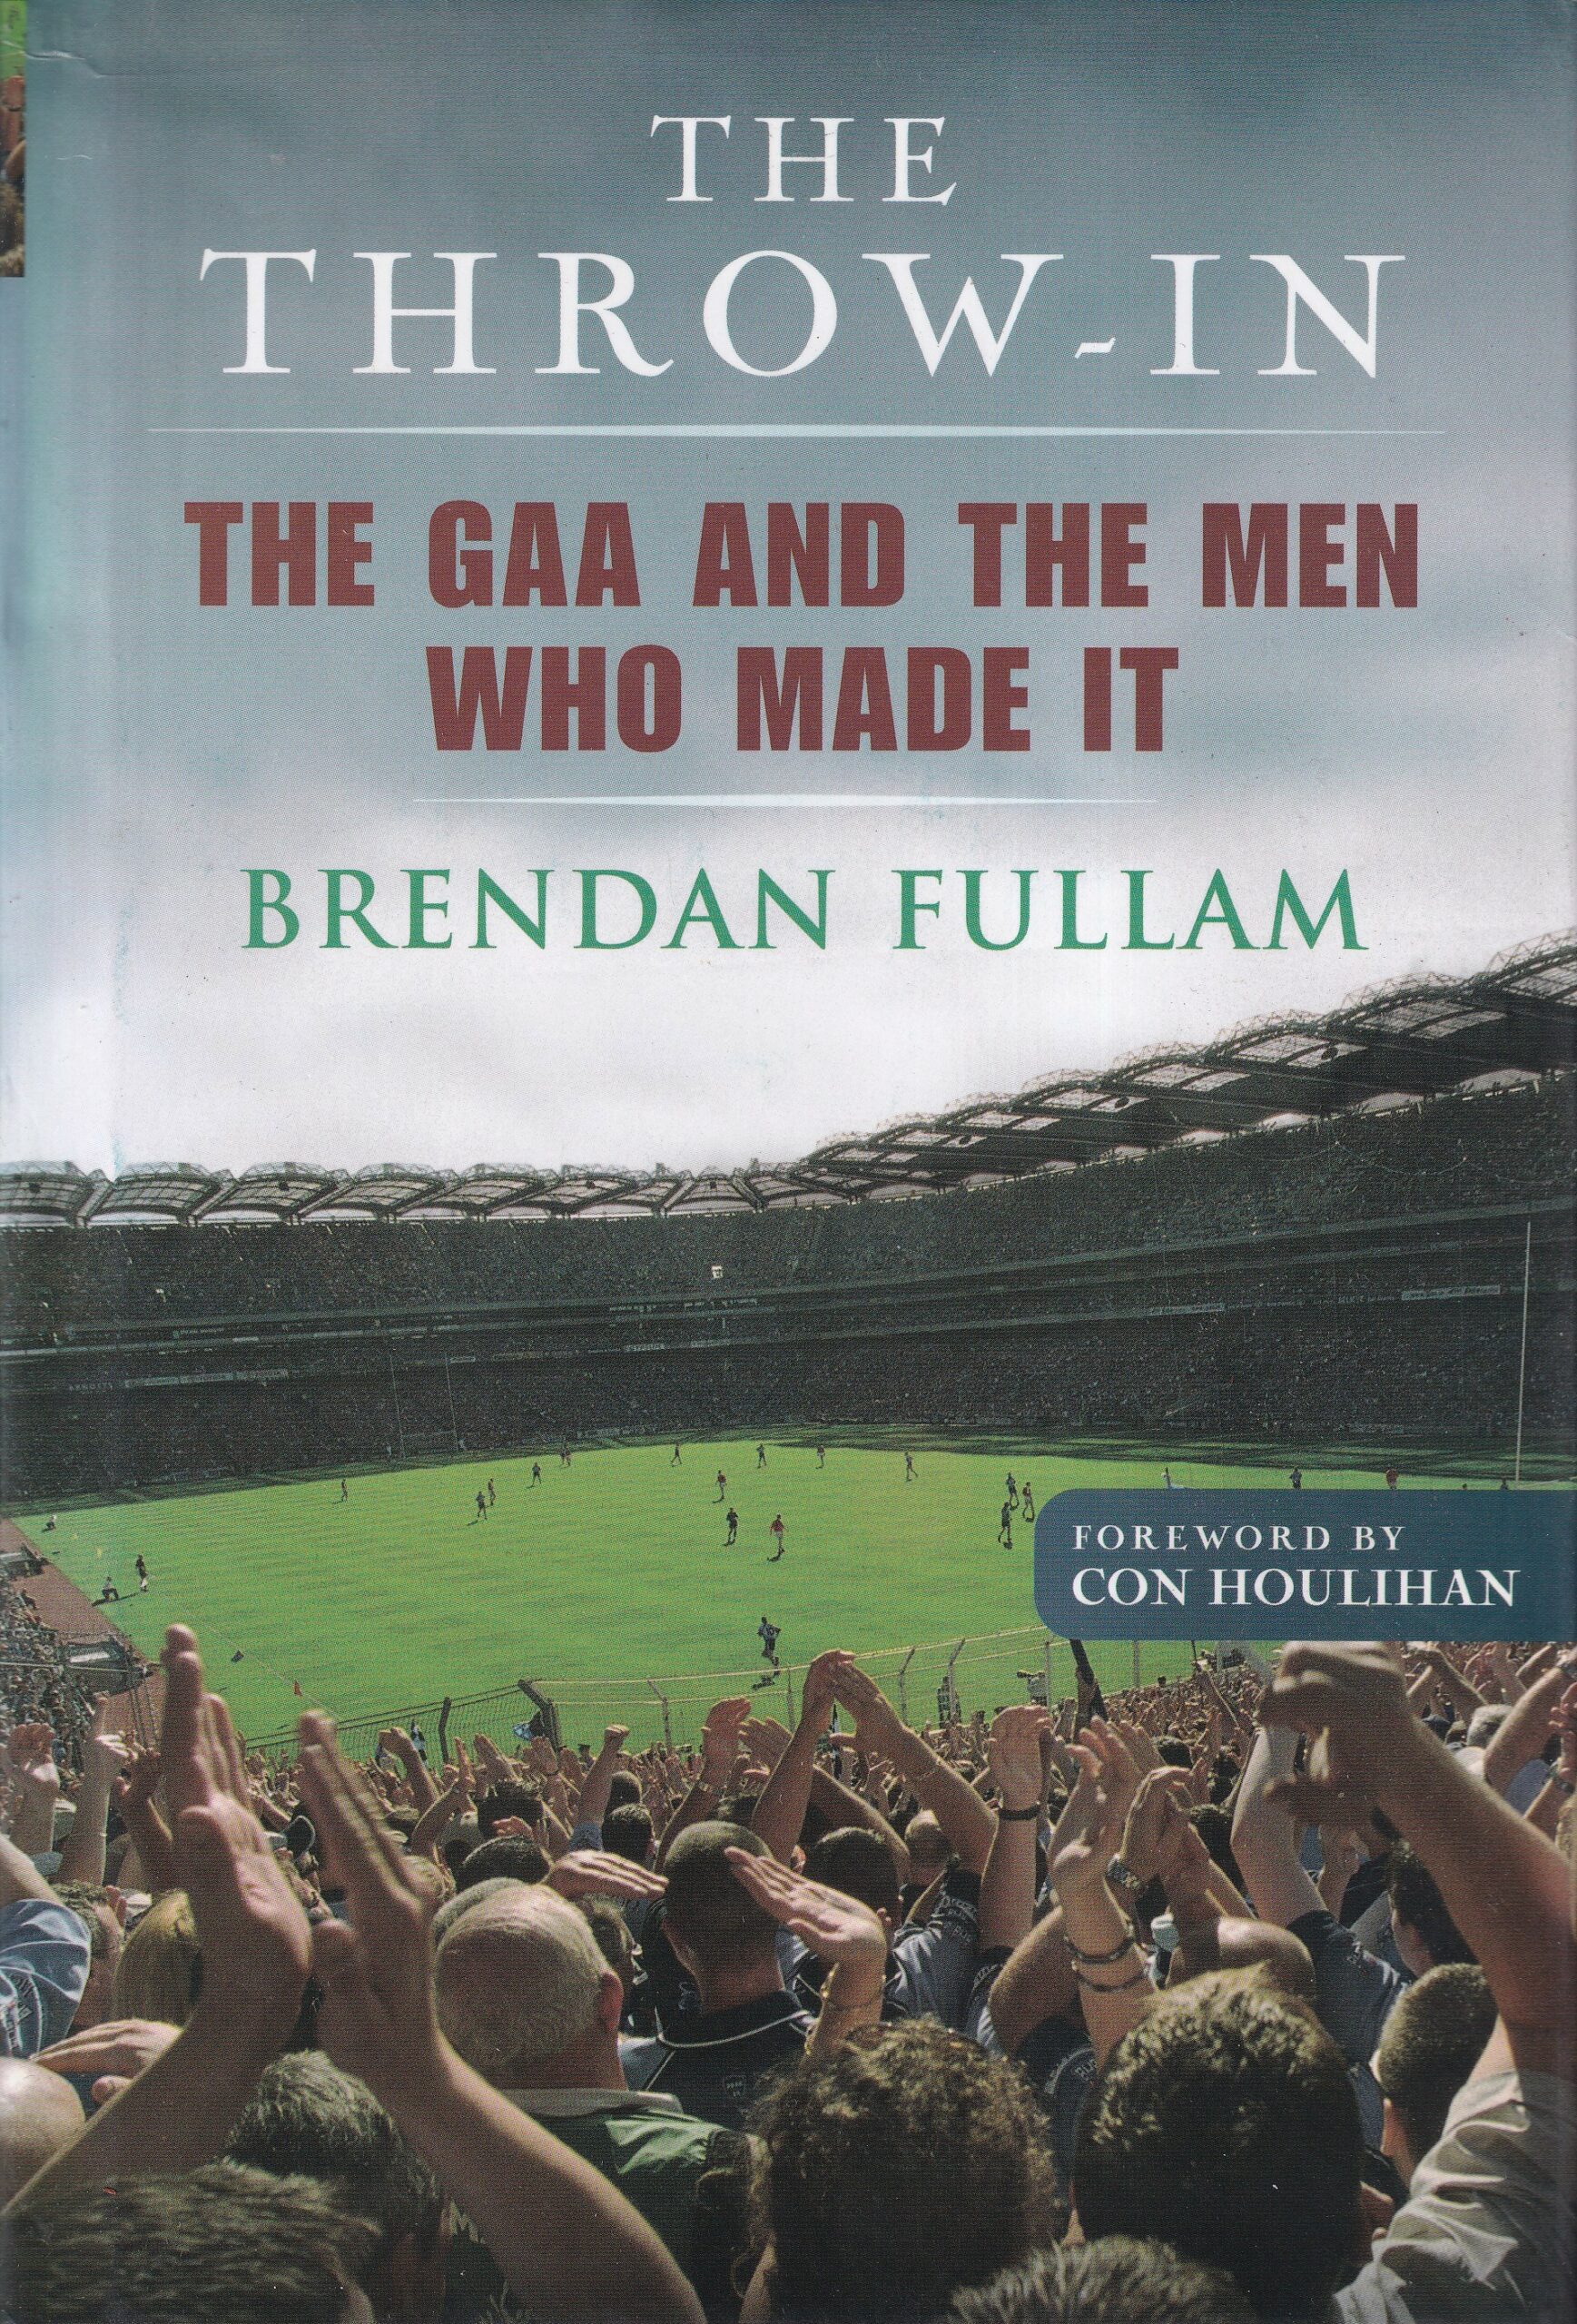 The Throw-In: The GAA and the Men Who Made it by Brendan Fullam